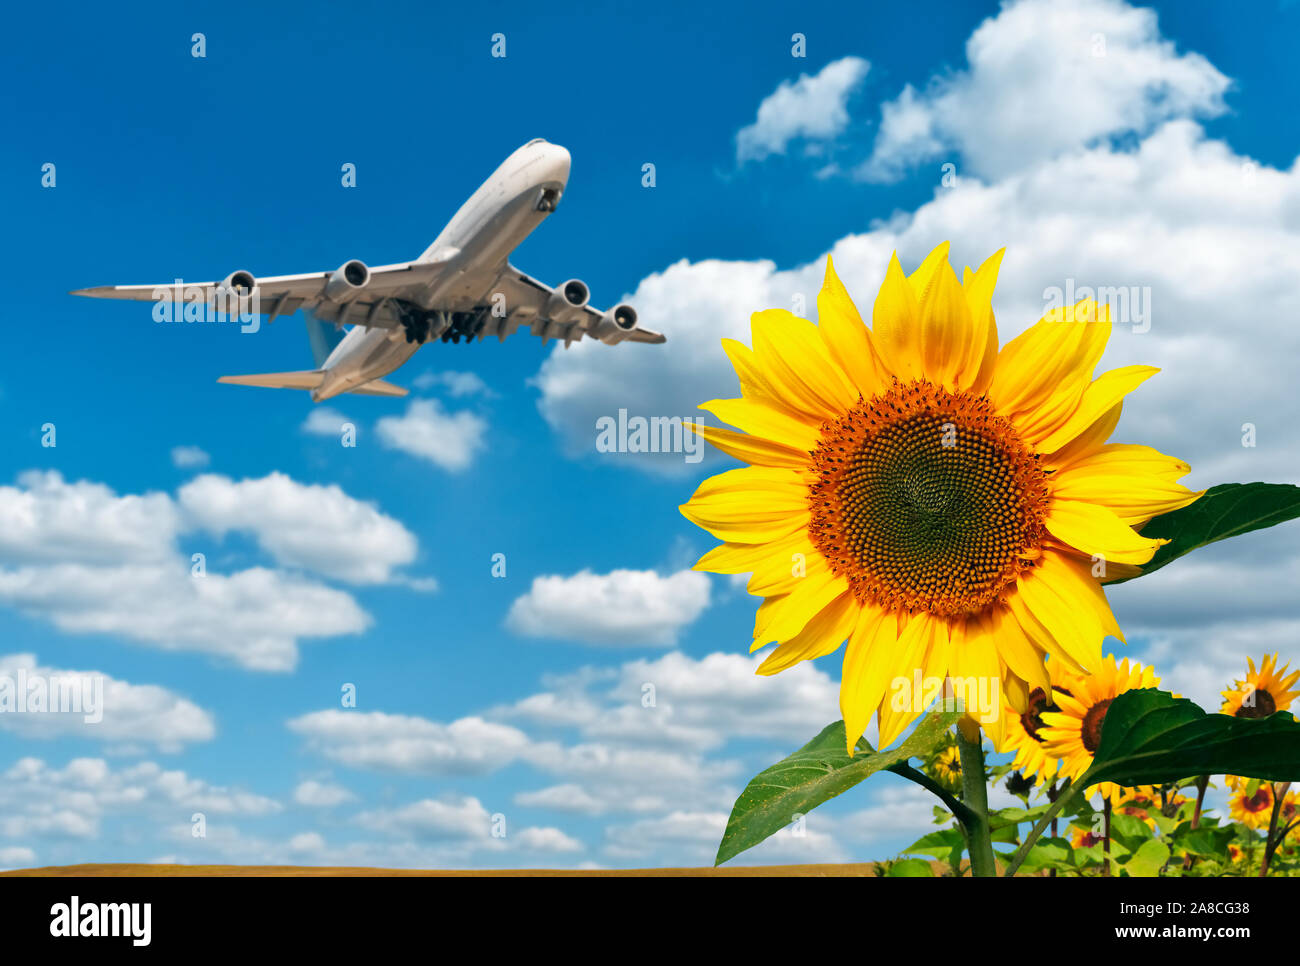 Sunflowers with blue sky, clouds and airplane in the background Stock Photo